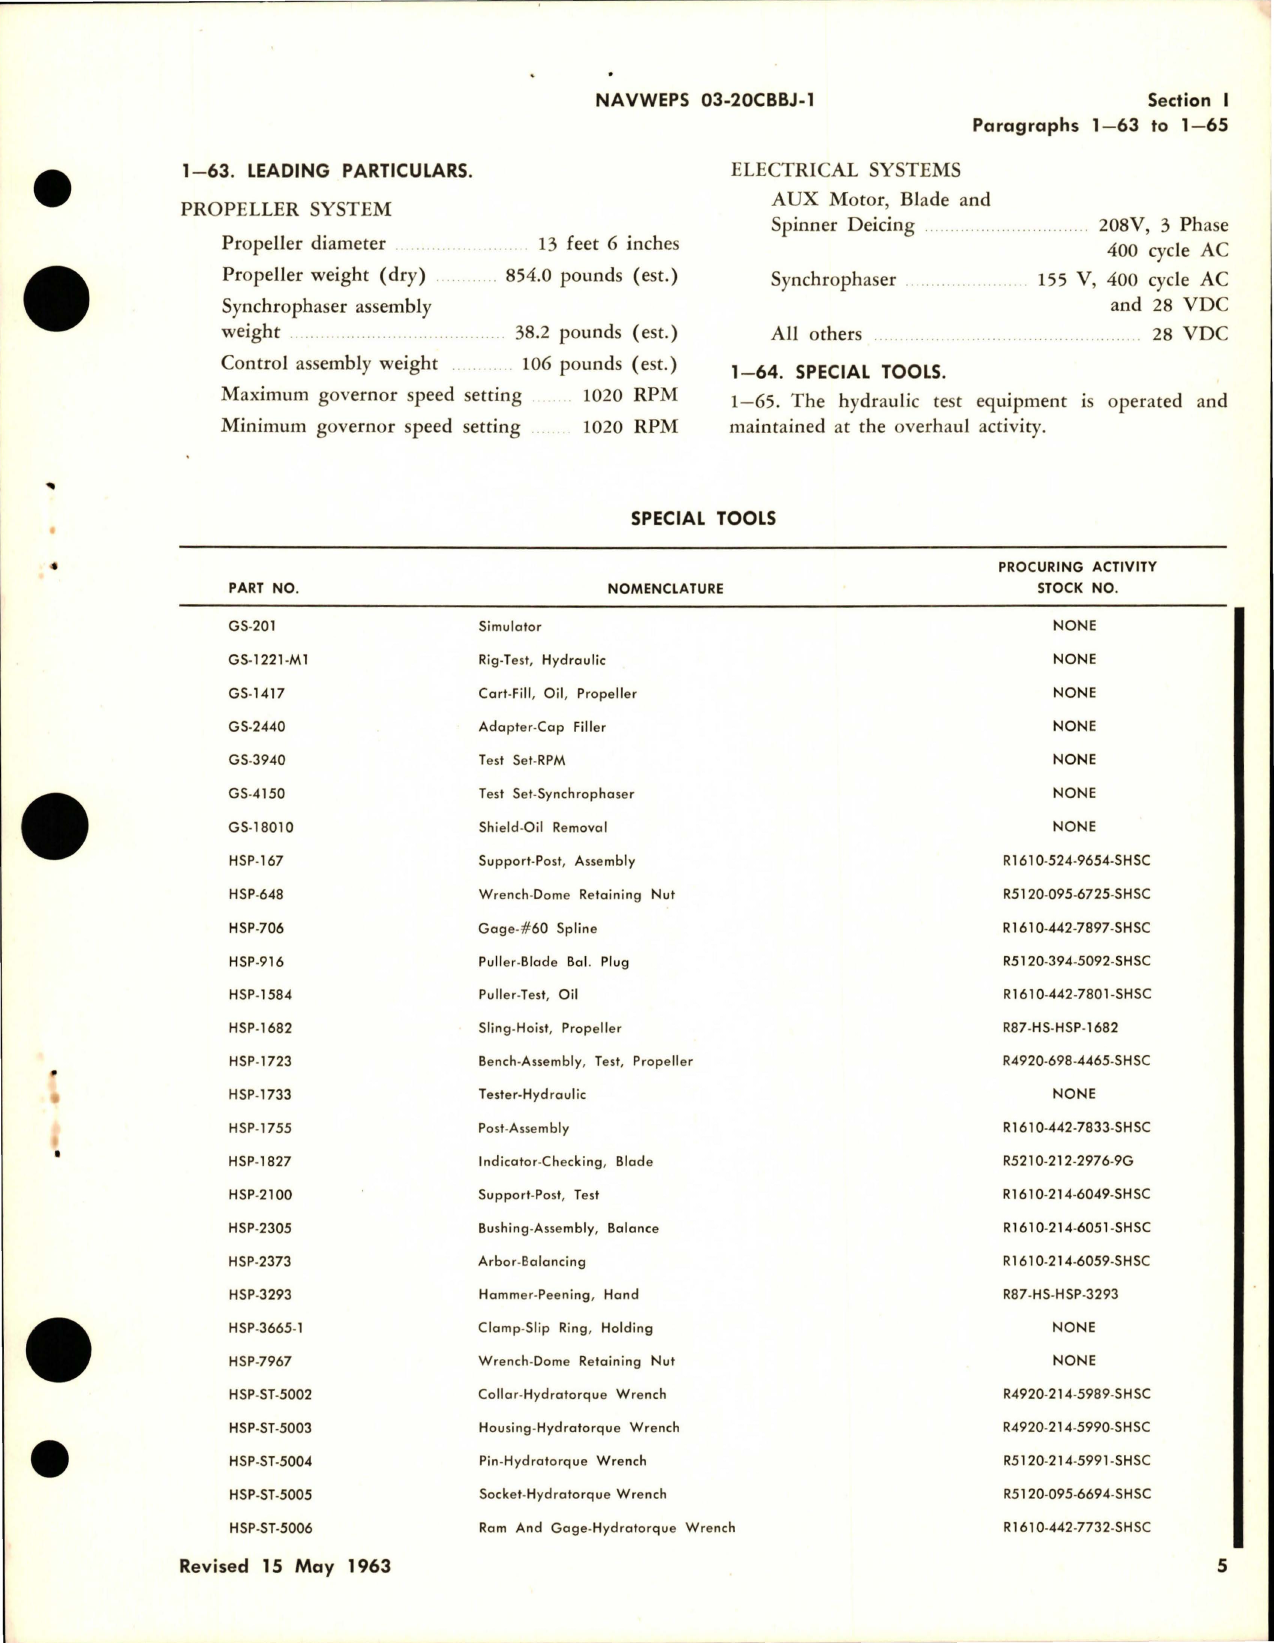 Sample page 5 from AirCorps Library document: Operation and Maintenance Instructions for Variable Pitch Propeller - Models 54H60-73, 54H60-75, 54H60-85, and 54H60-89